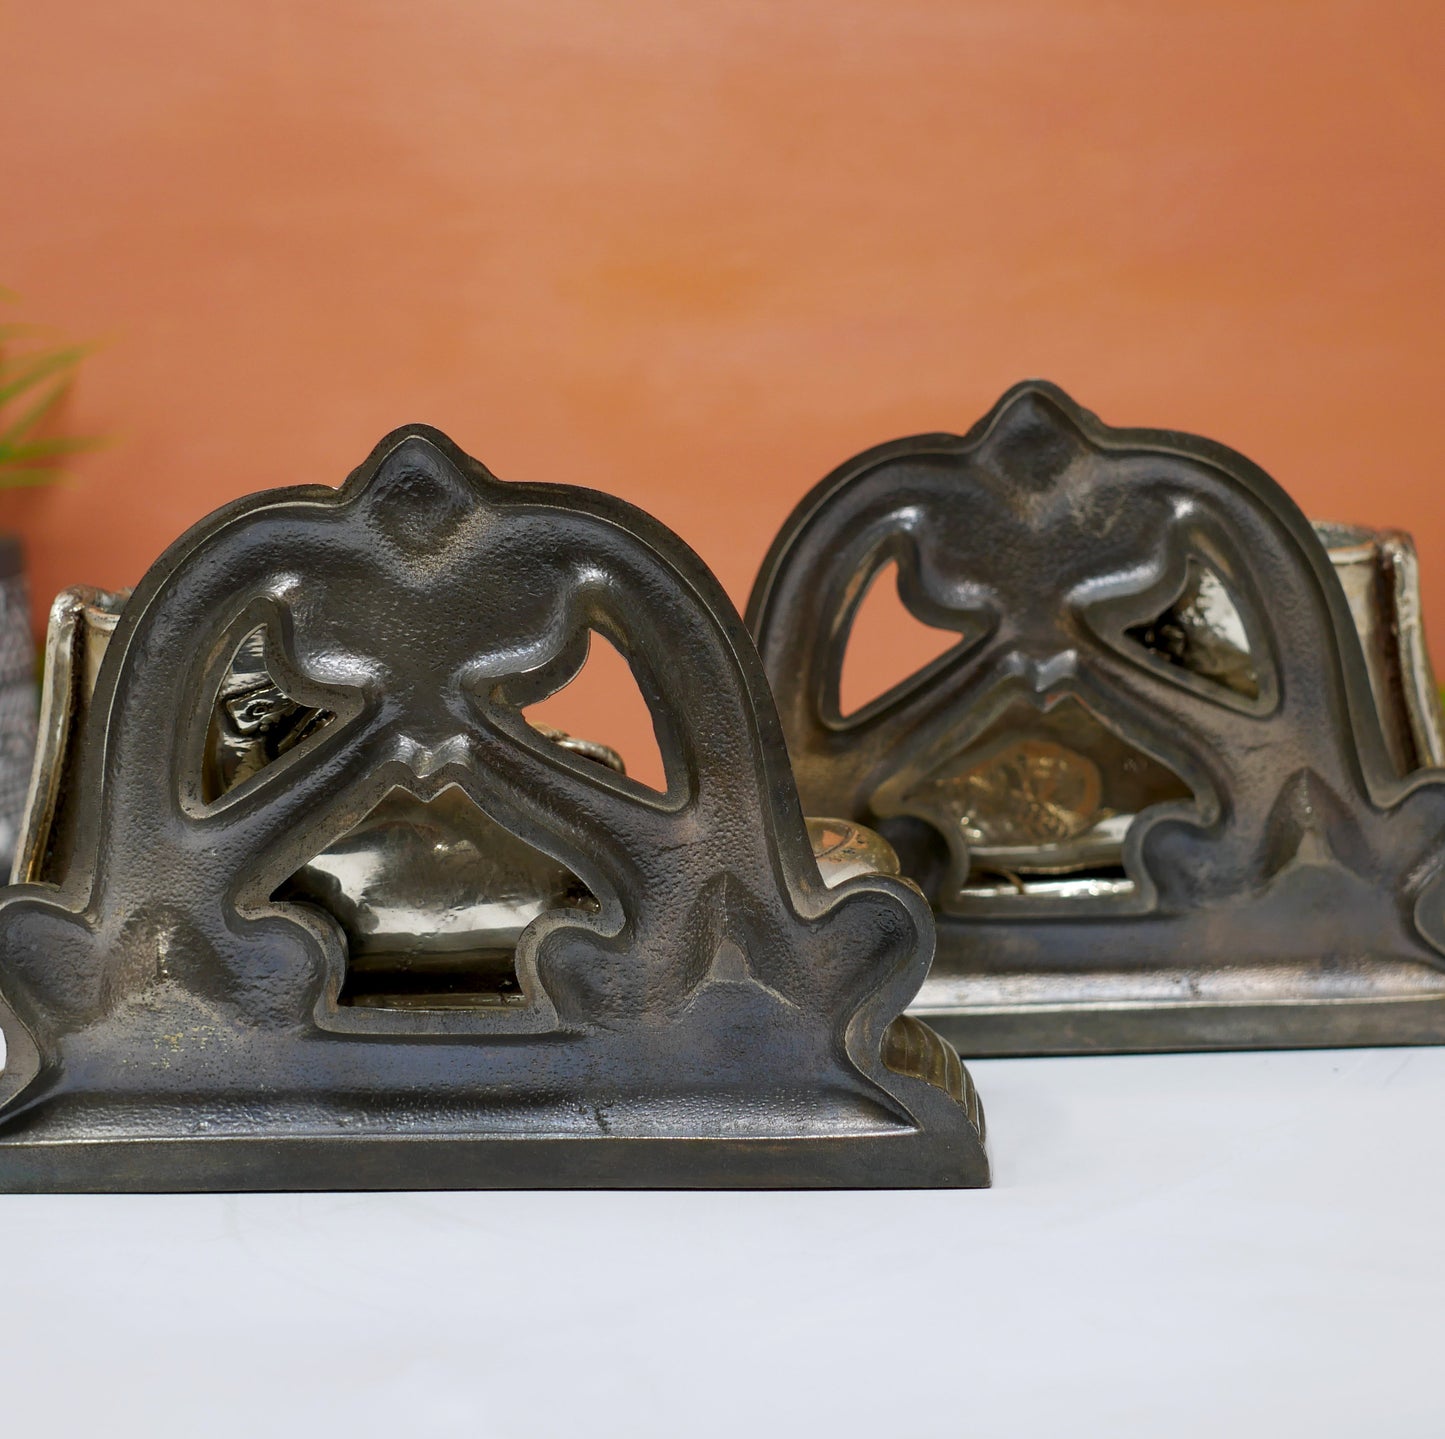 Vintage Metal Baby Shoe Bookend Pair - Home Decor Collectible